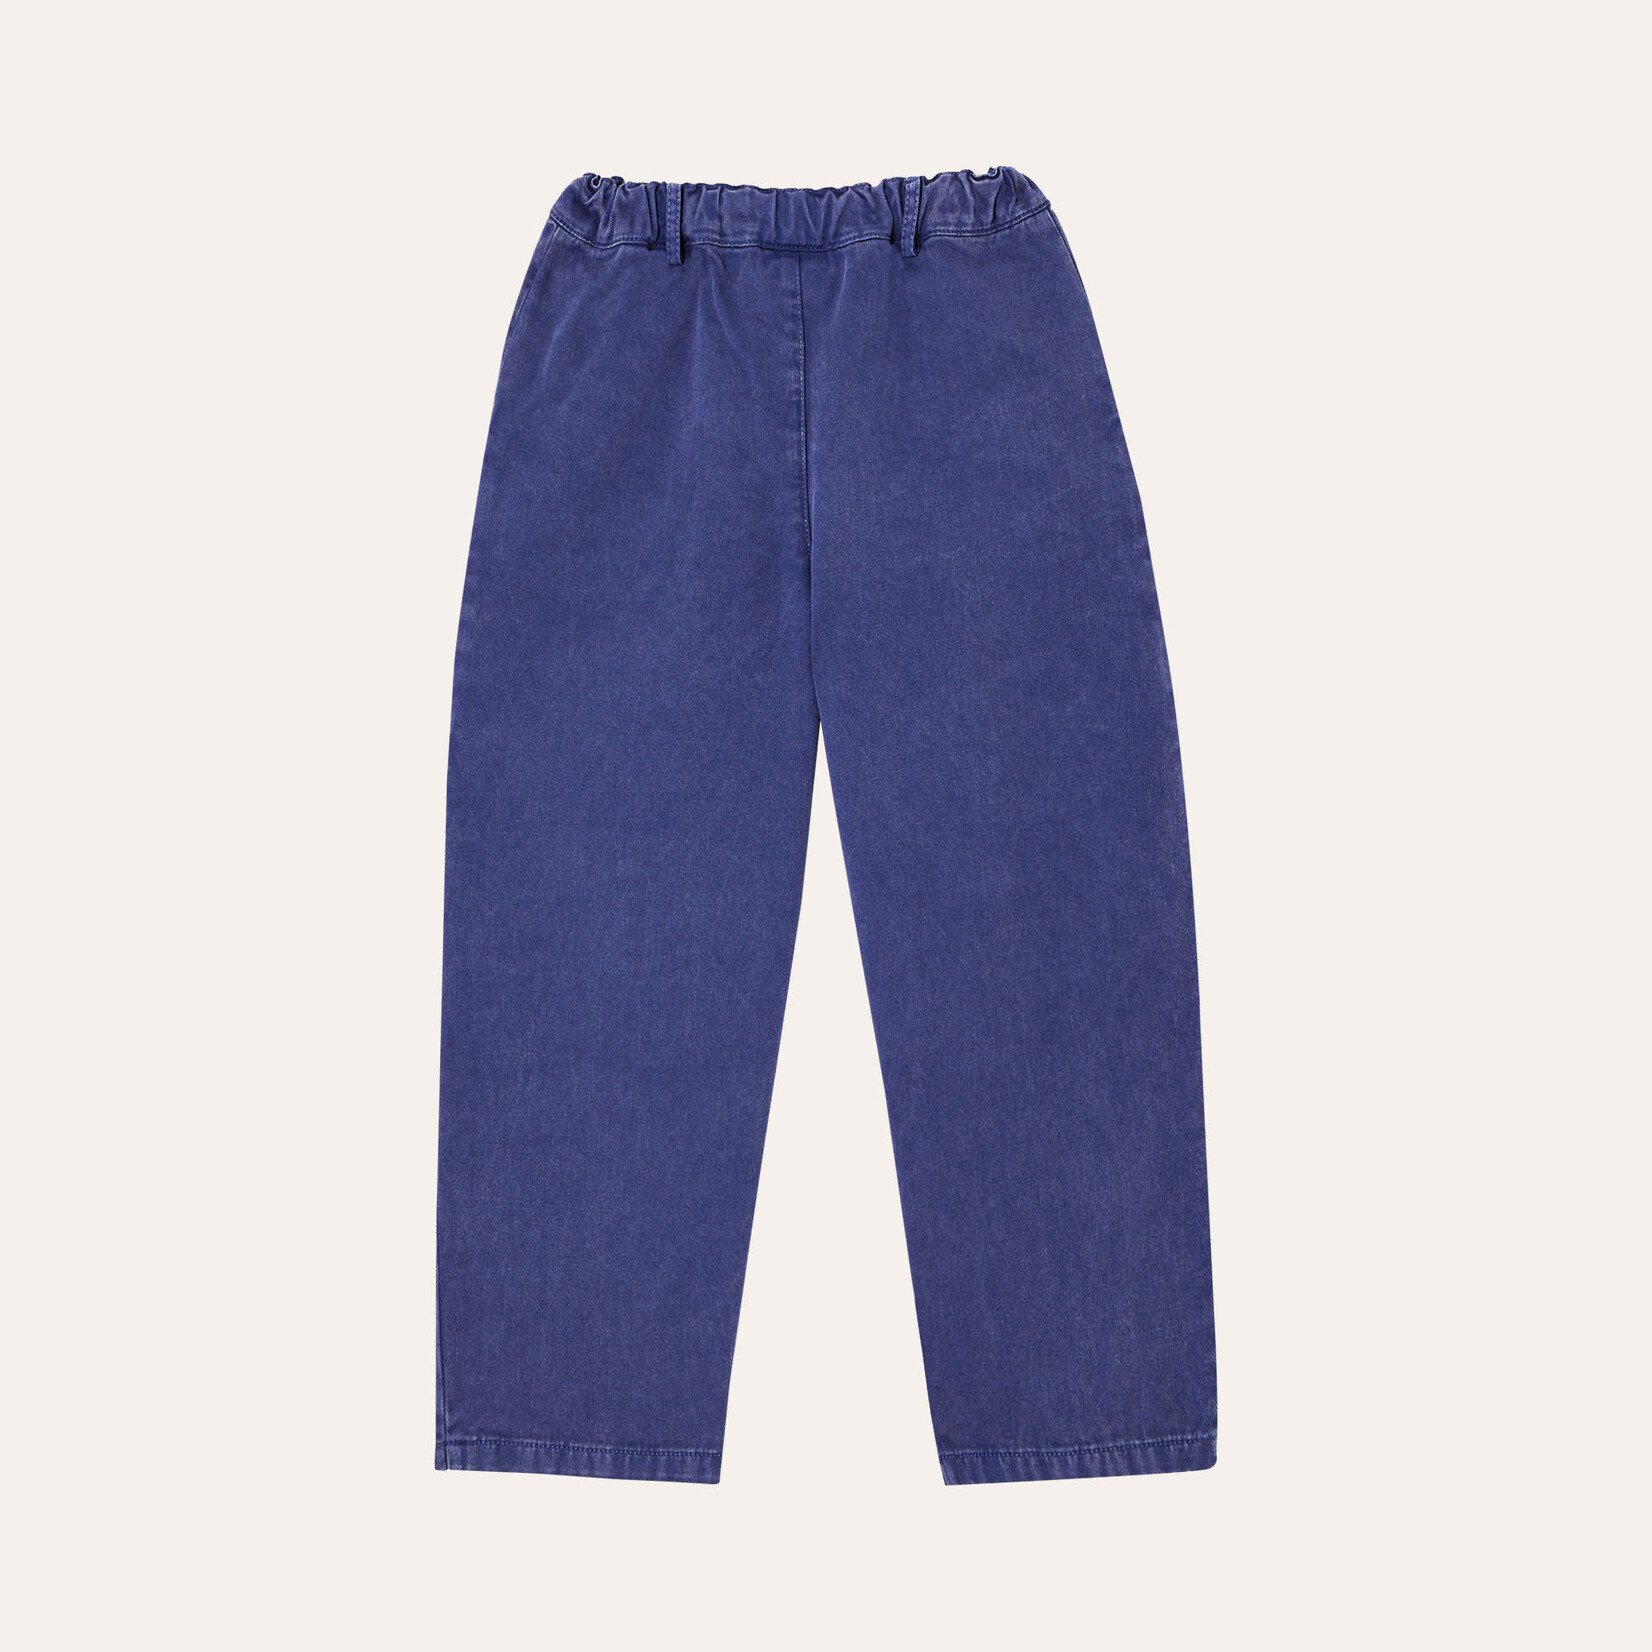 The Campamento Trousers - blue washed